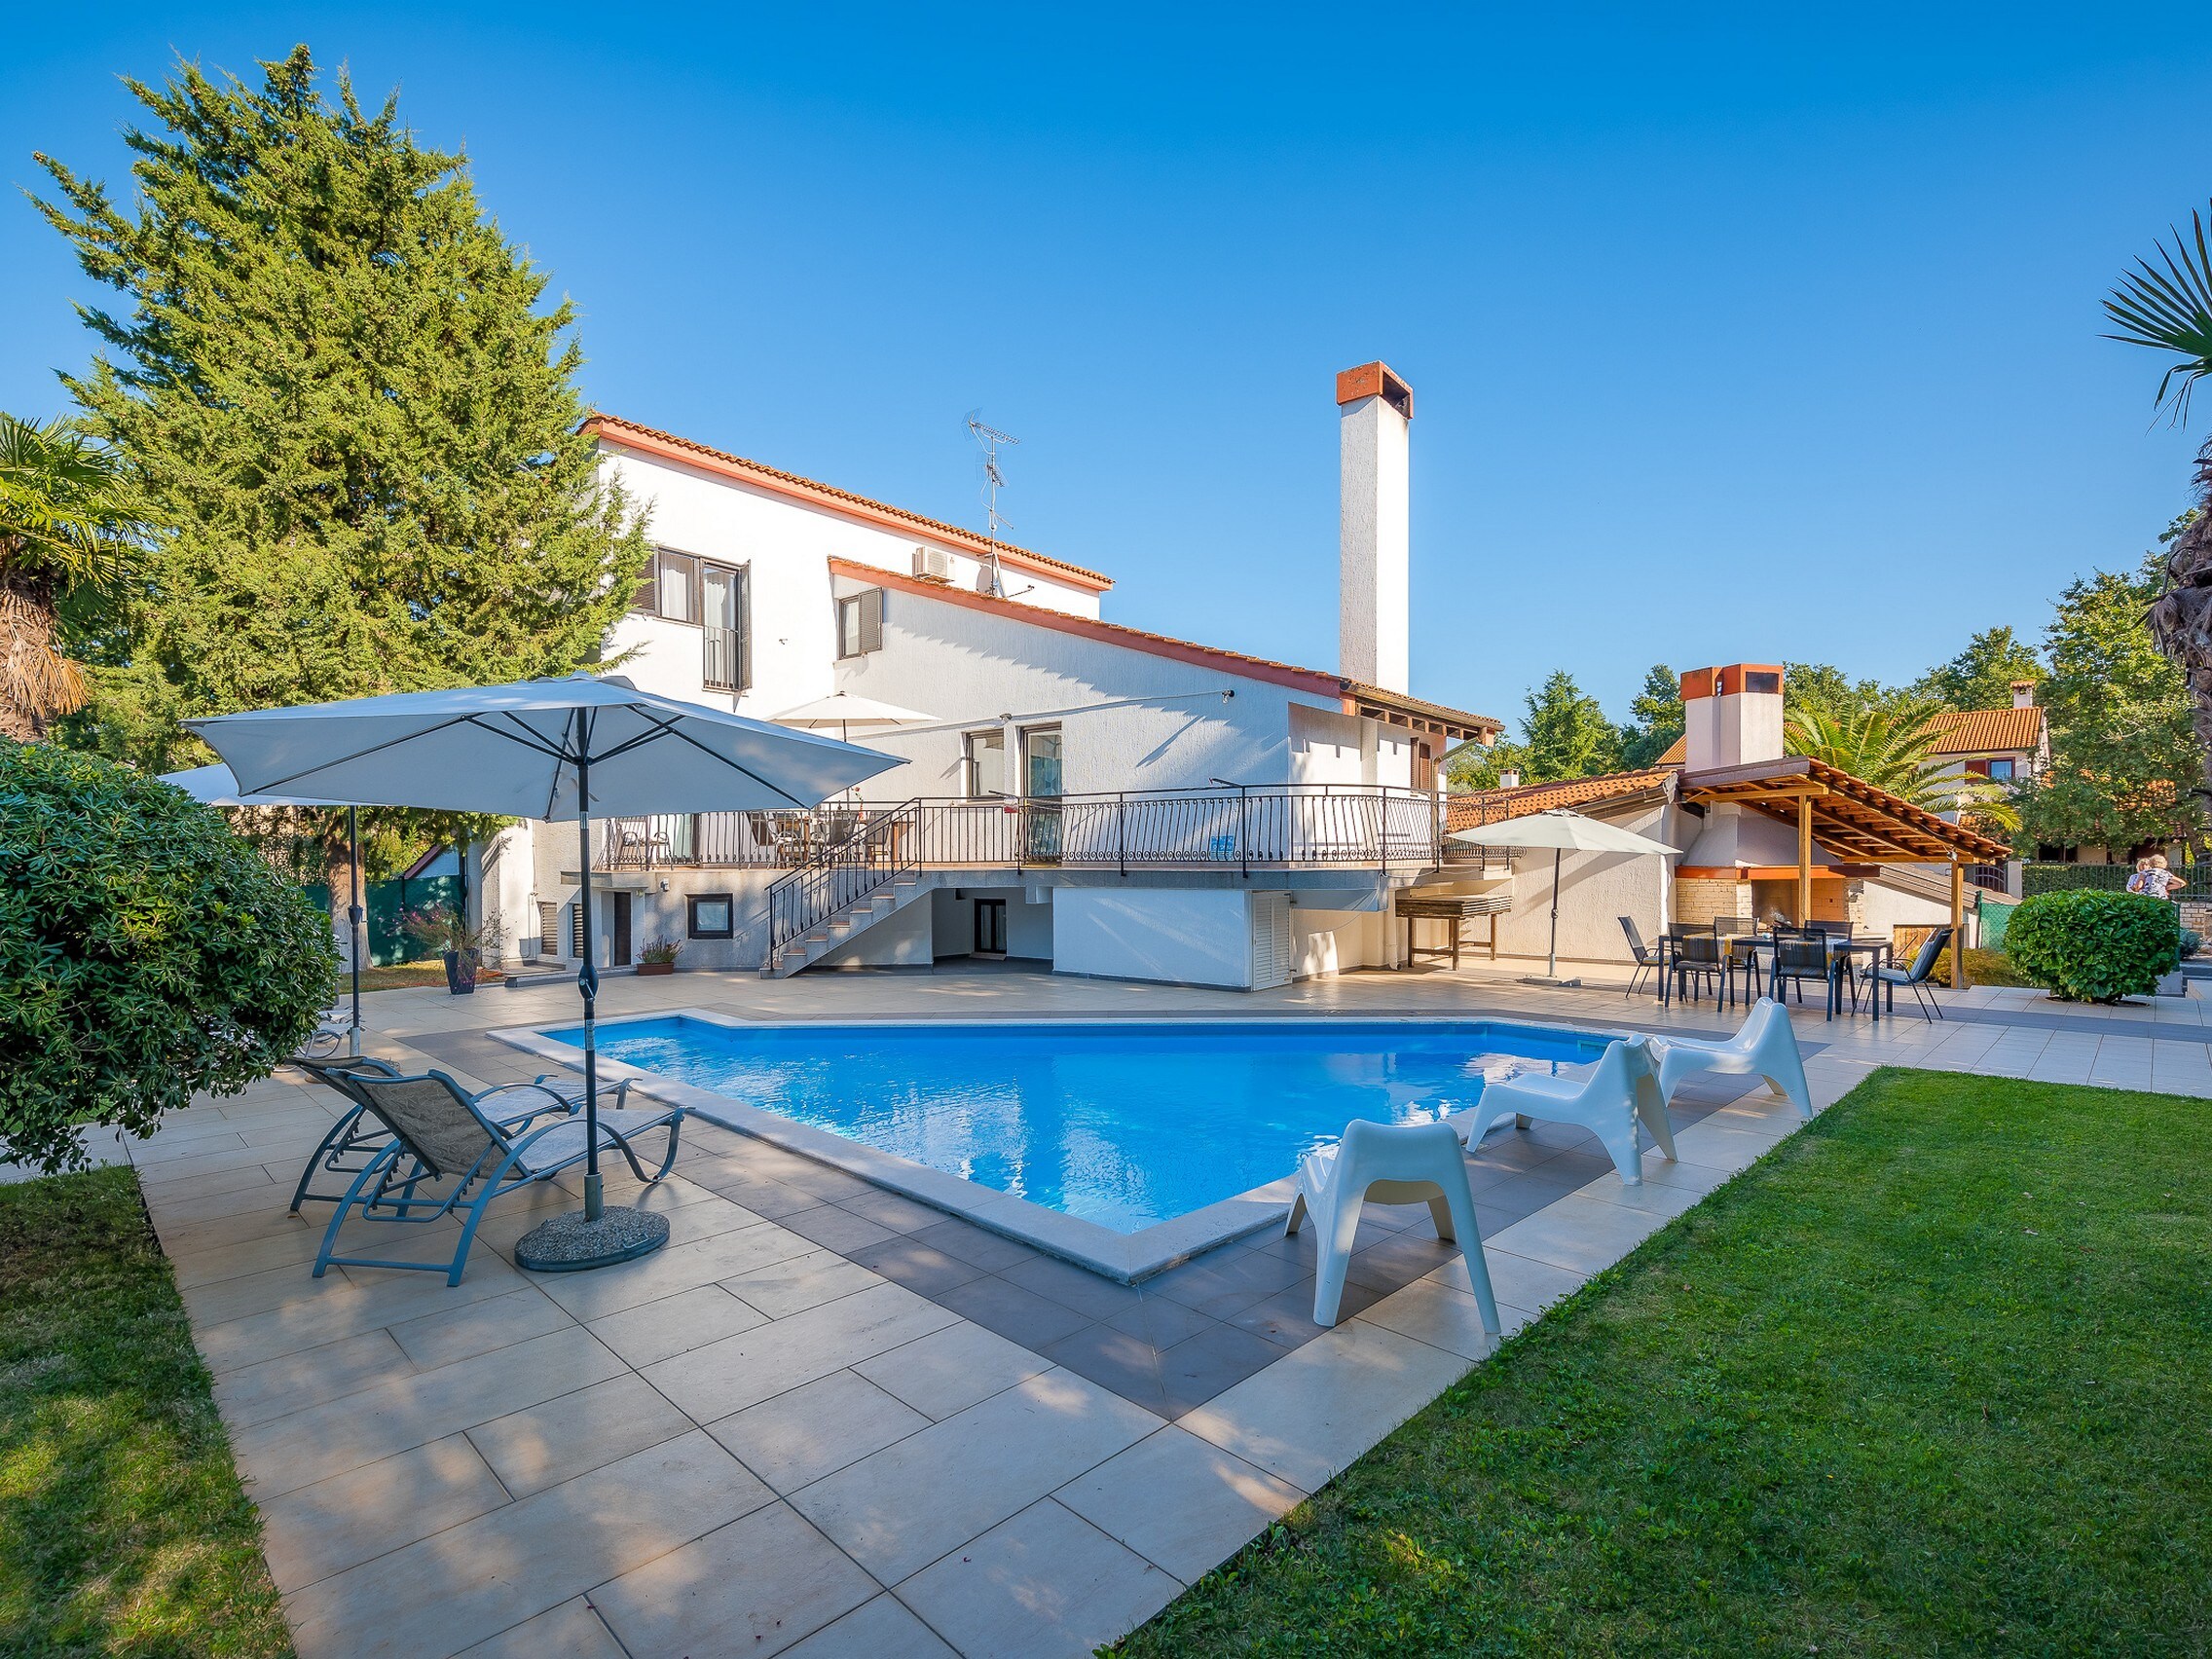 Property Image 2 - Villa Martimar with pool and hot tub